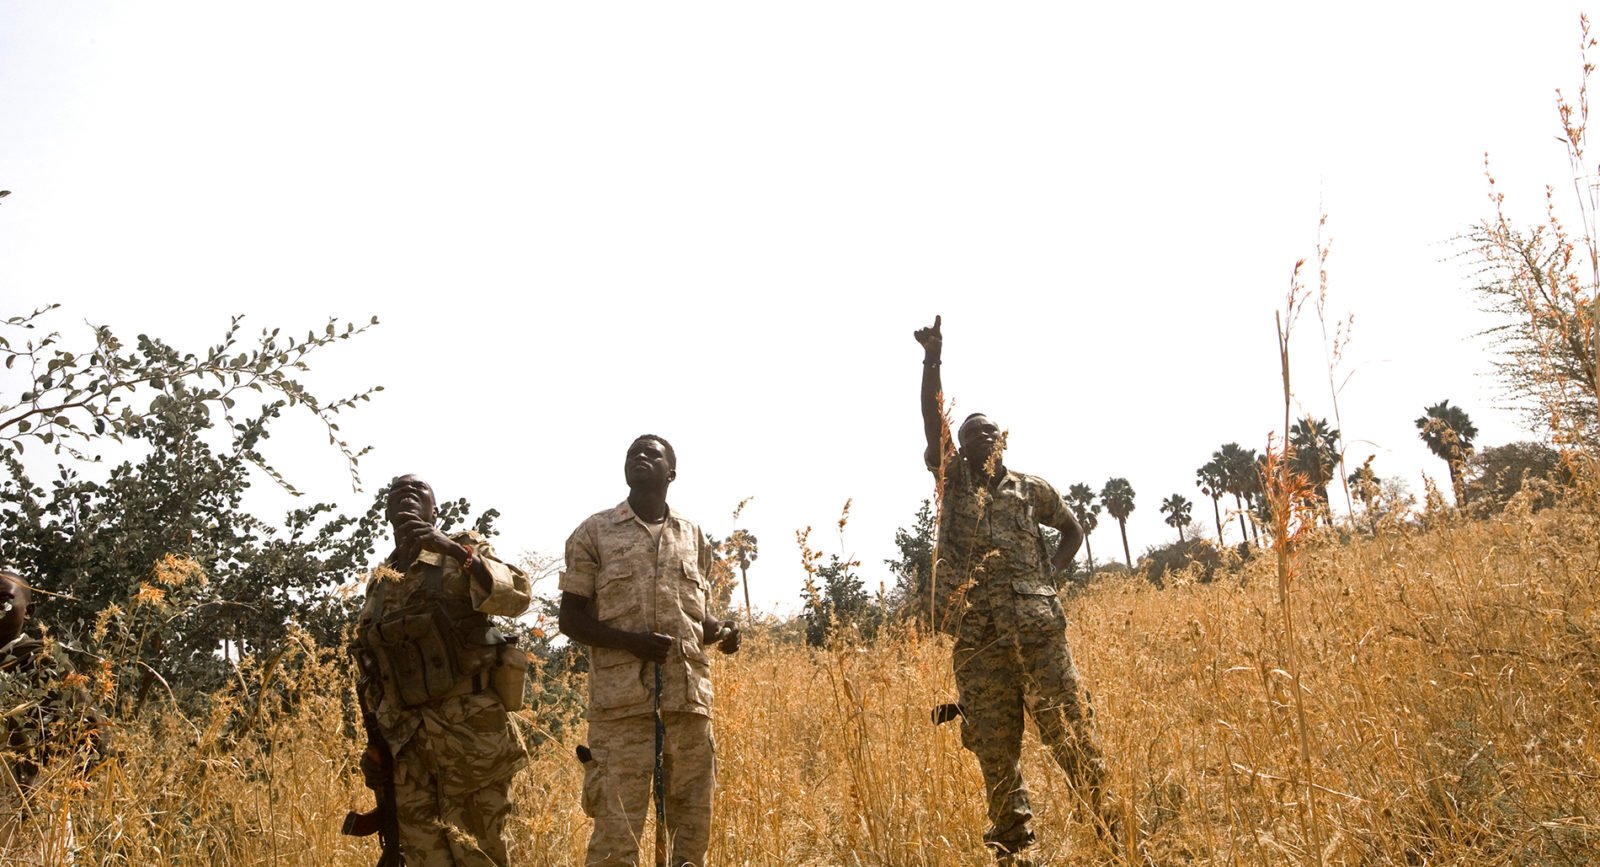 Two military chaplains and a soldier point to the sky as an airplane passes overhead in Sudan